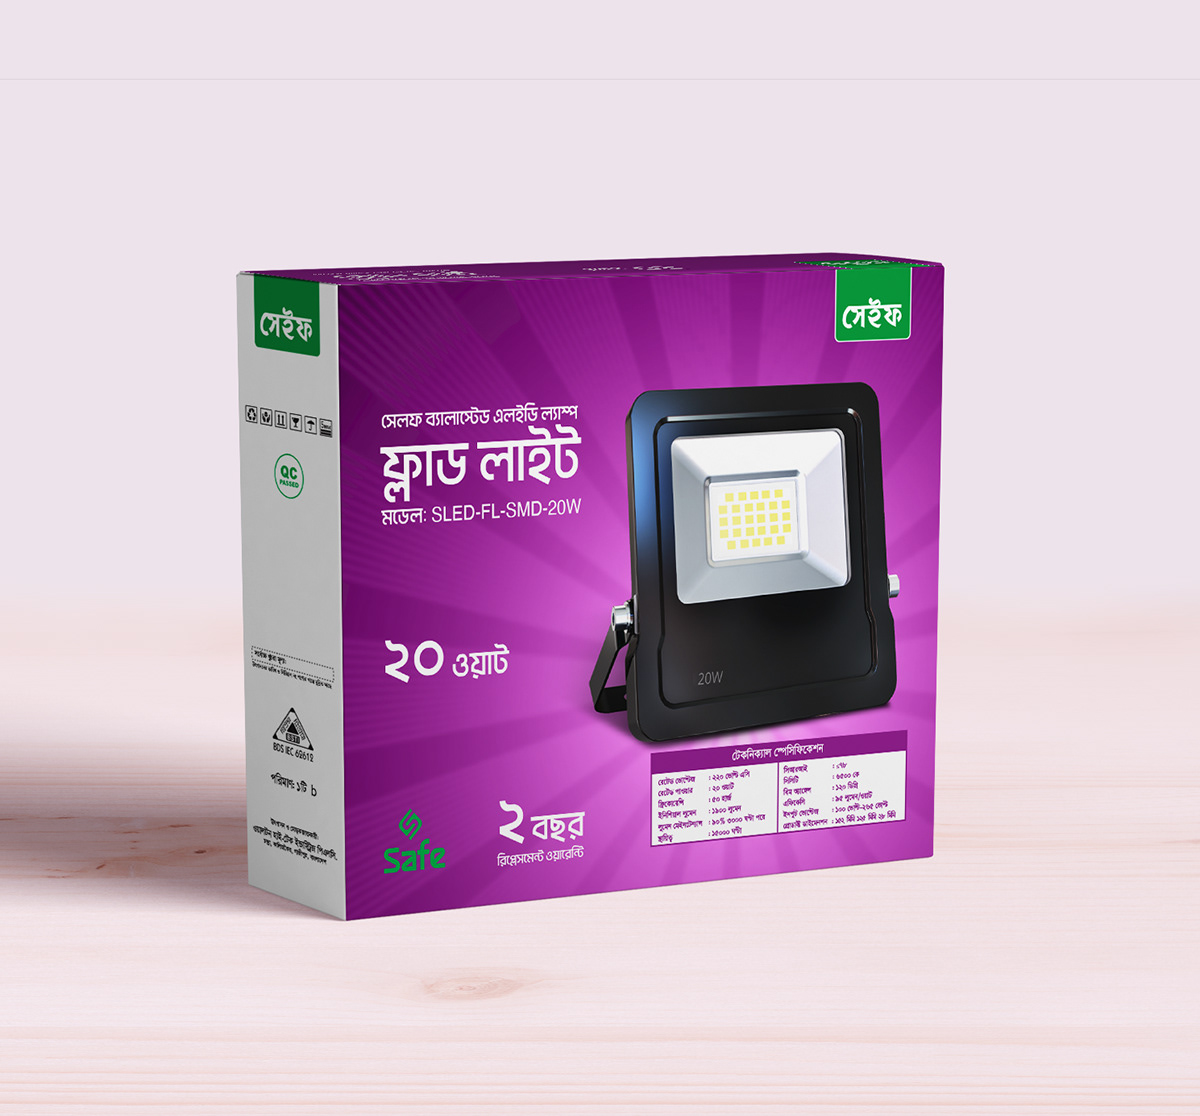 concept floodlight light MDRUBELCHOWDHURY Mockup Packaging packaging design product visual Walton